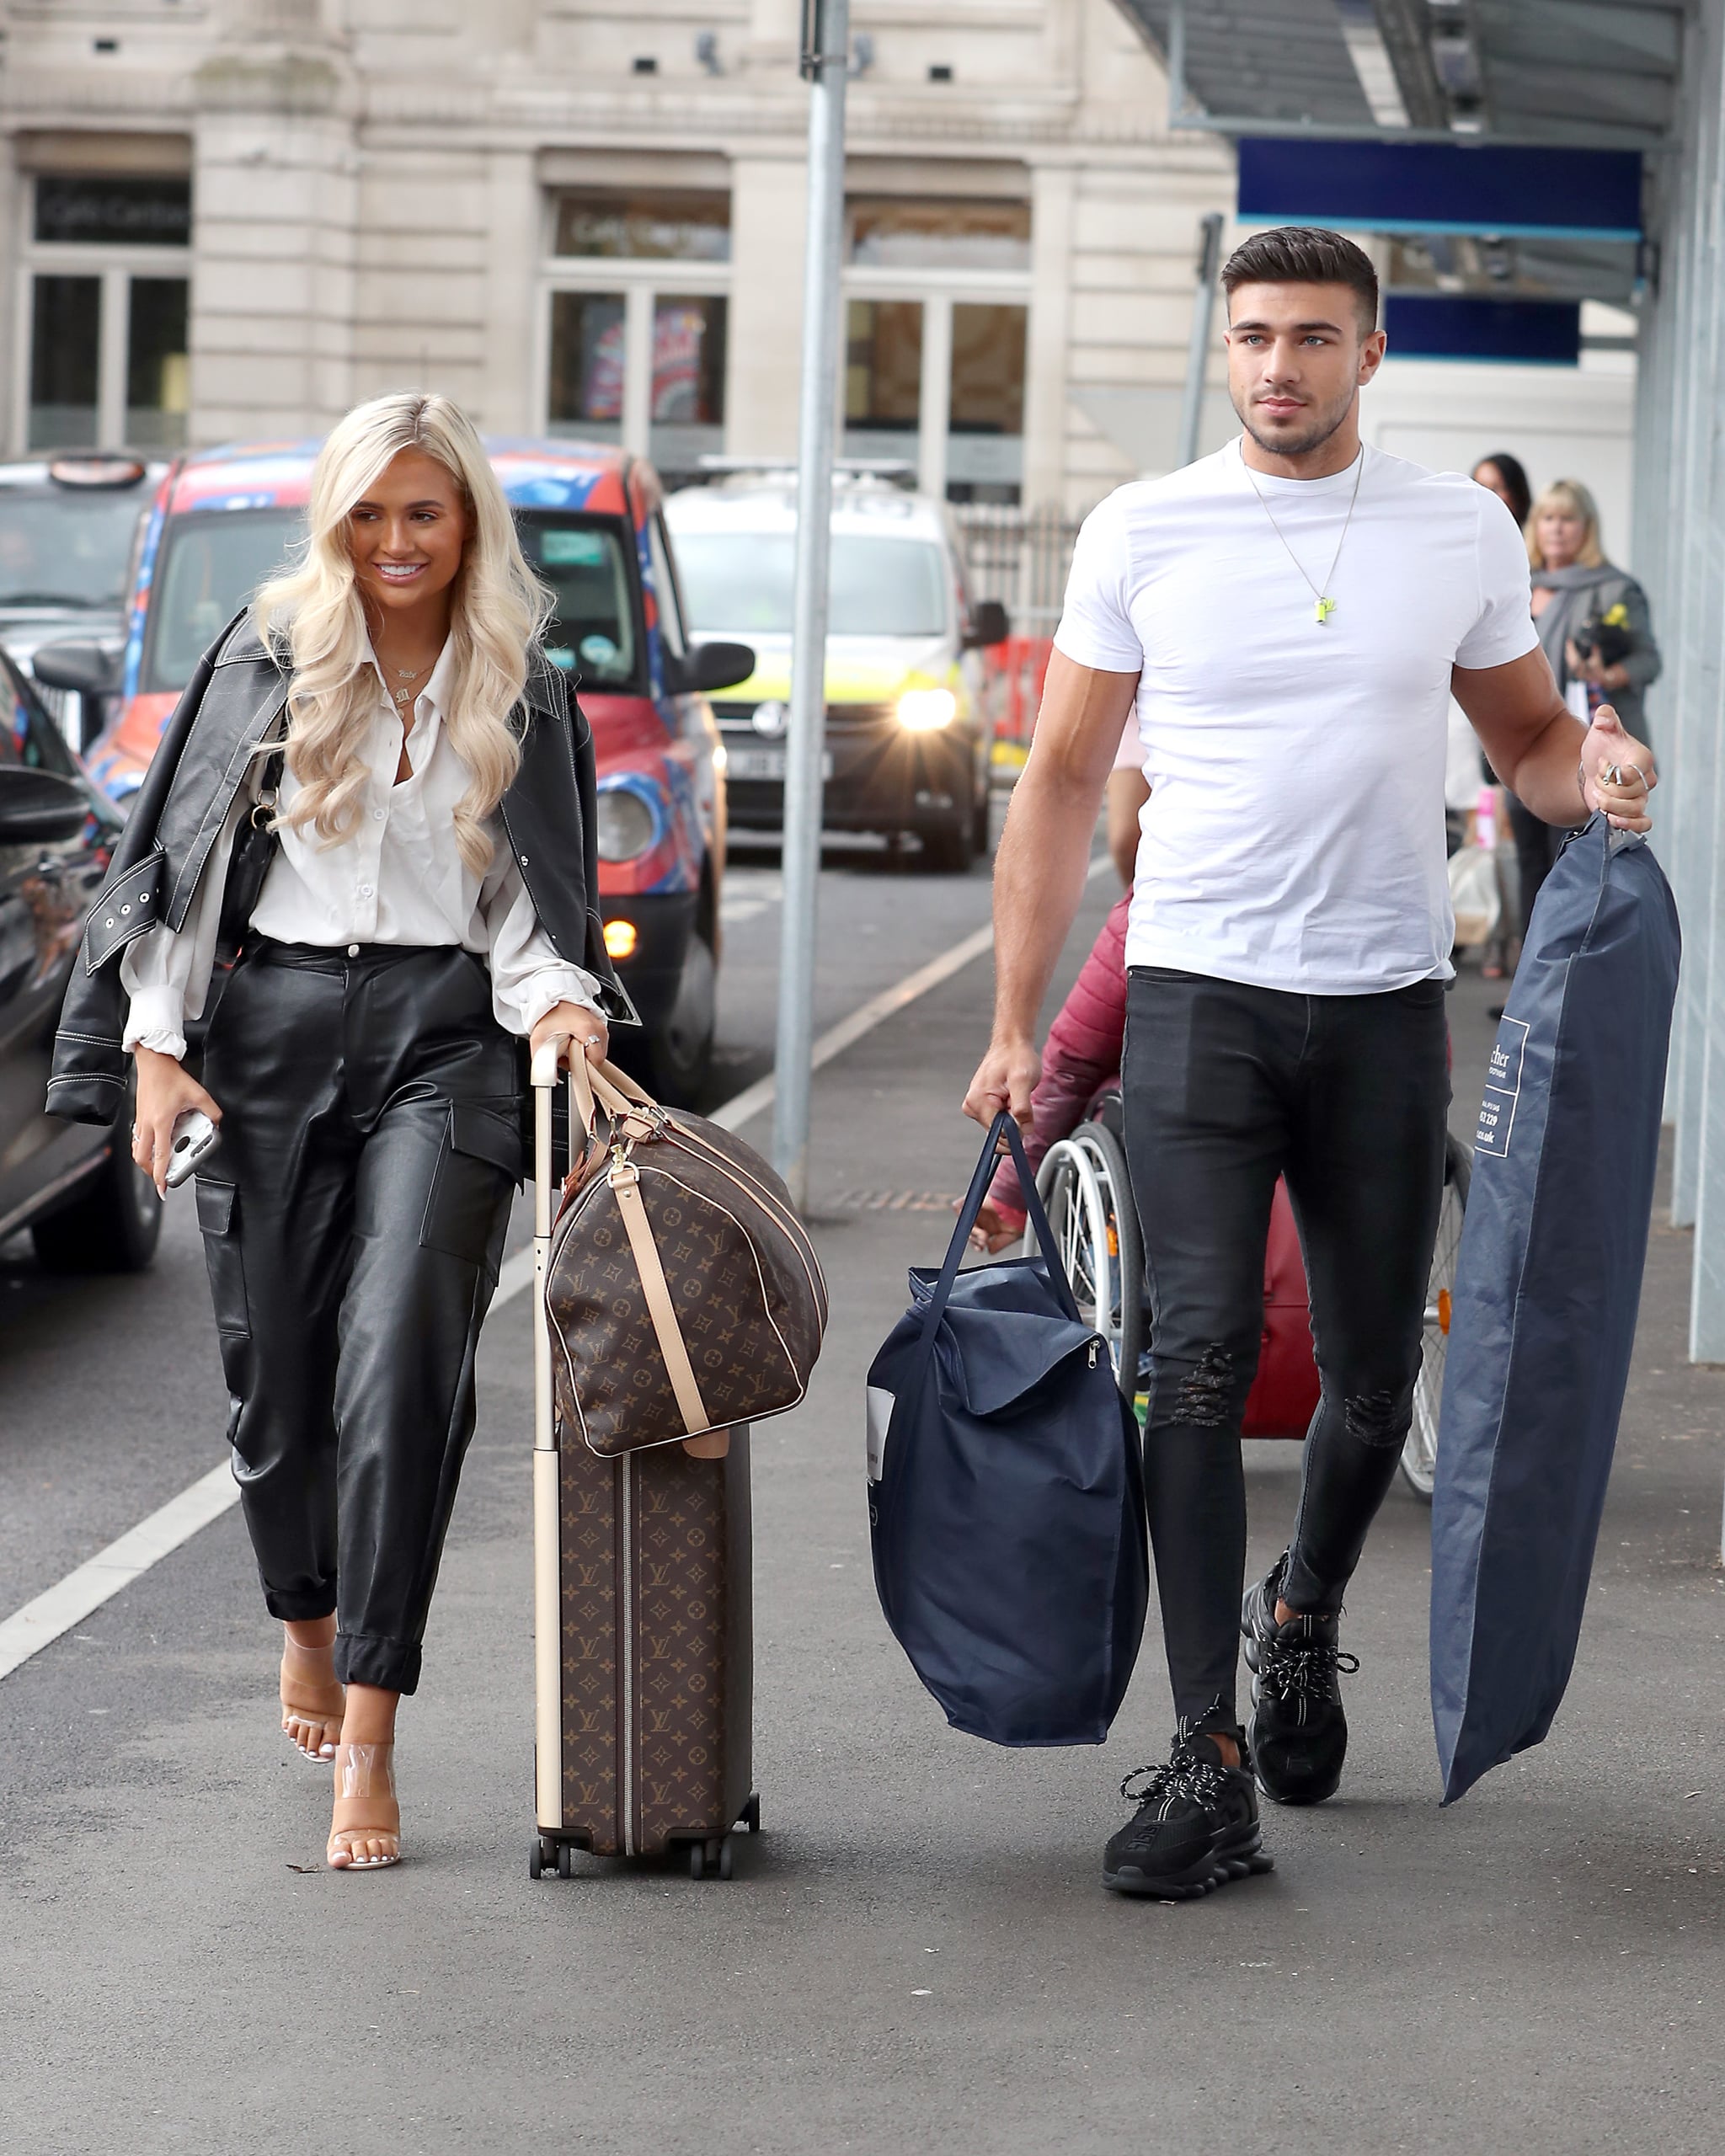 September 2019: Molly-Mae Hague and Tommy Fury Move In Together, From  Love Island to Parents, a Look Back at Molly-Mae Hague and Tommy Fury's  Romance